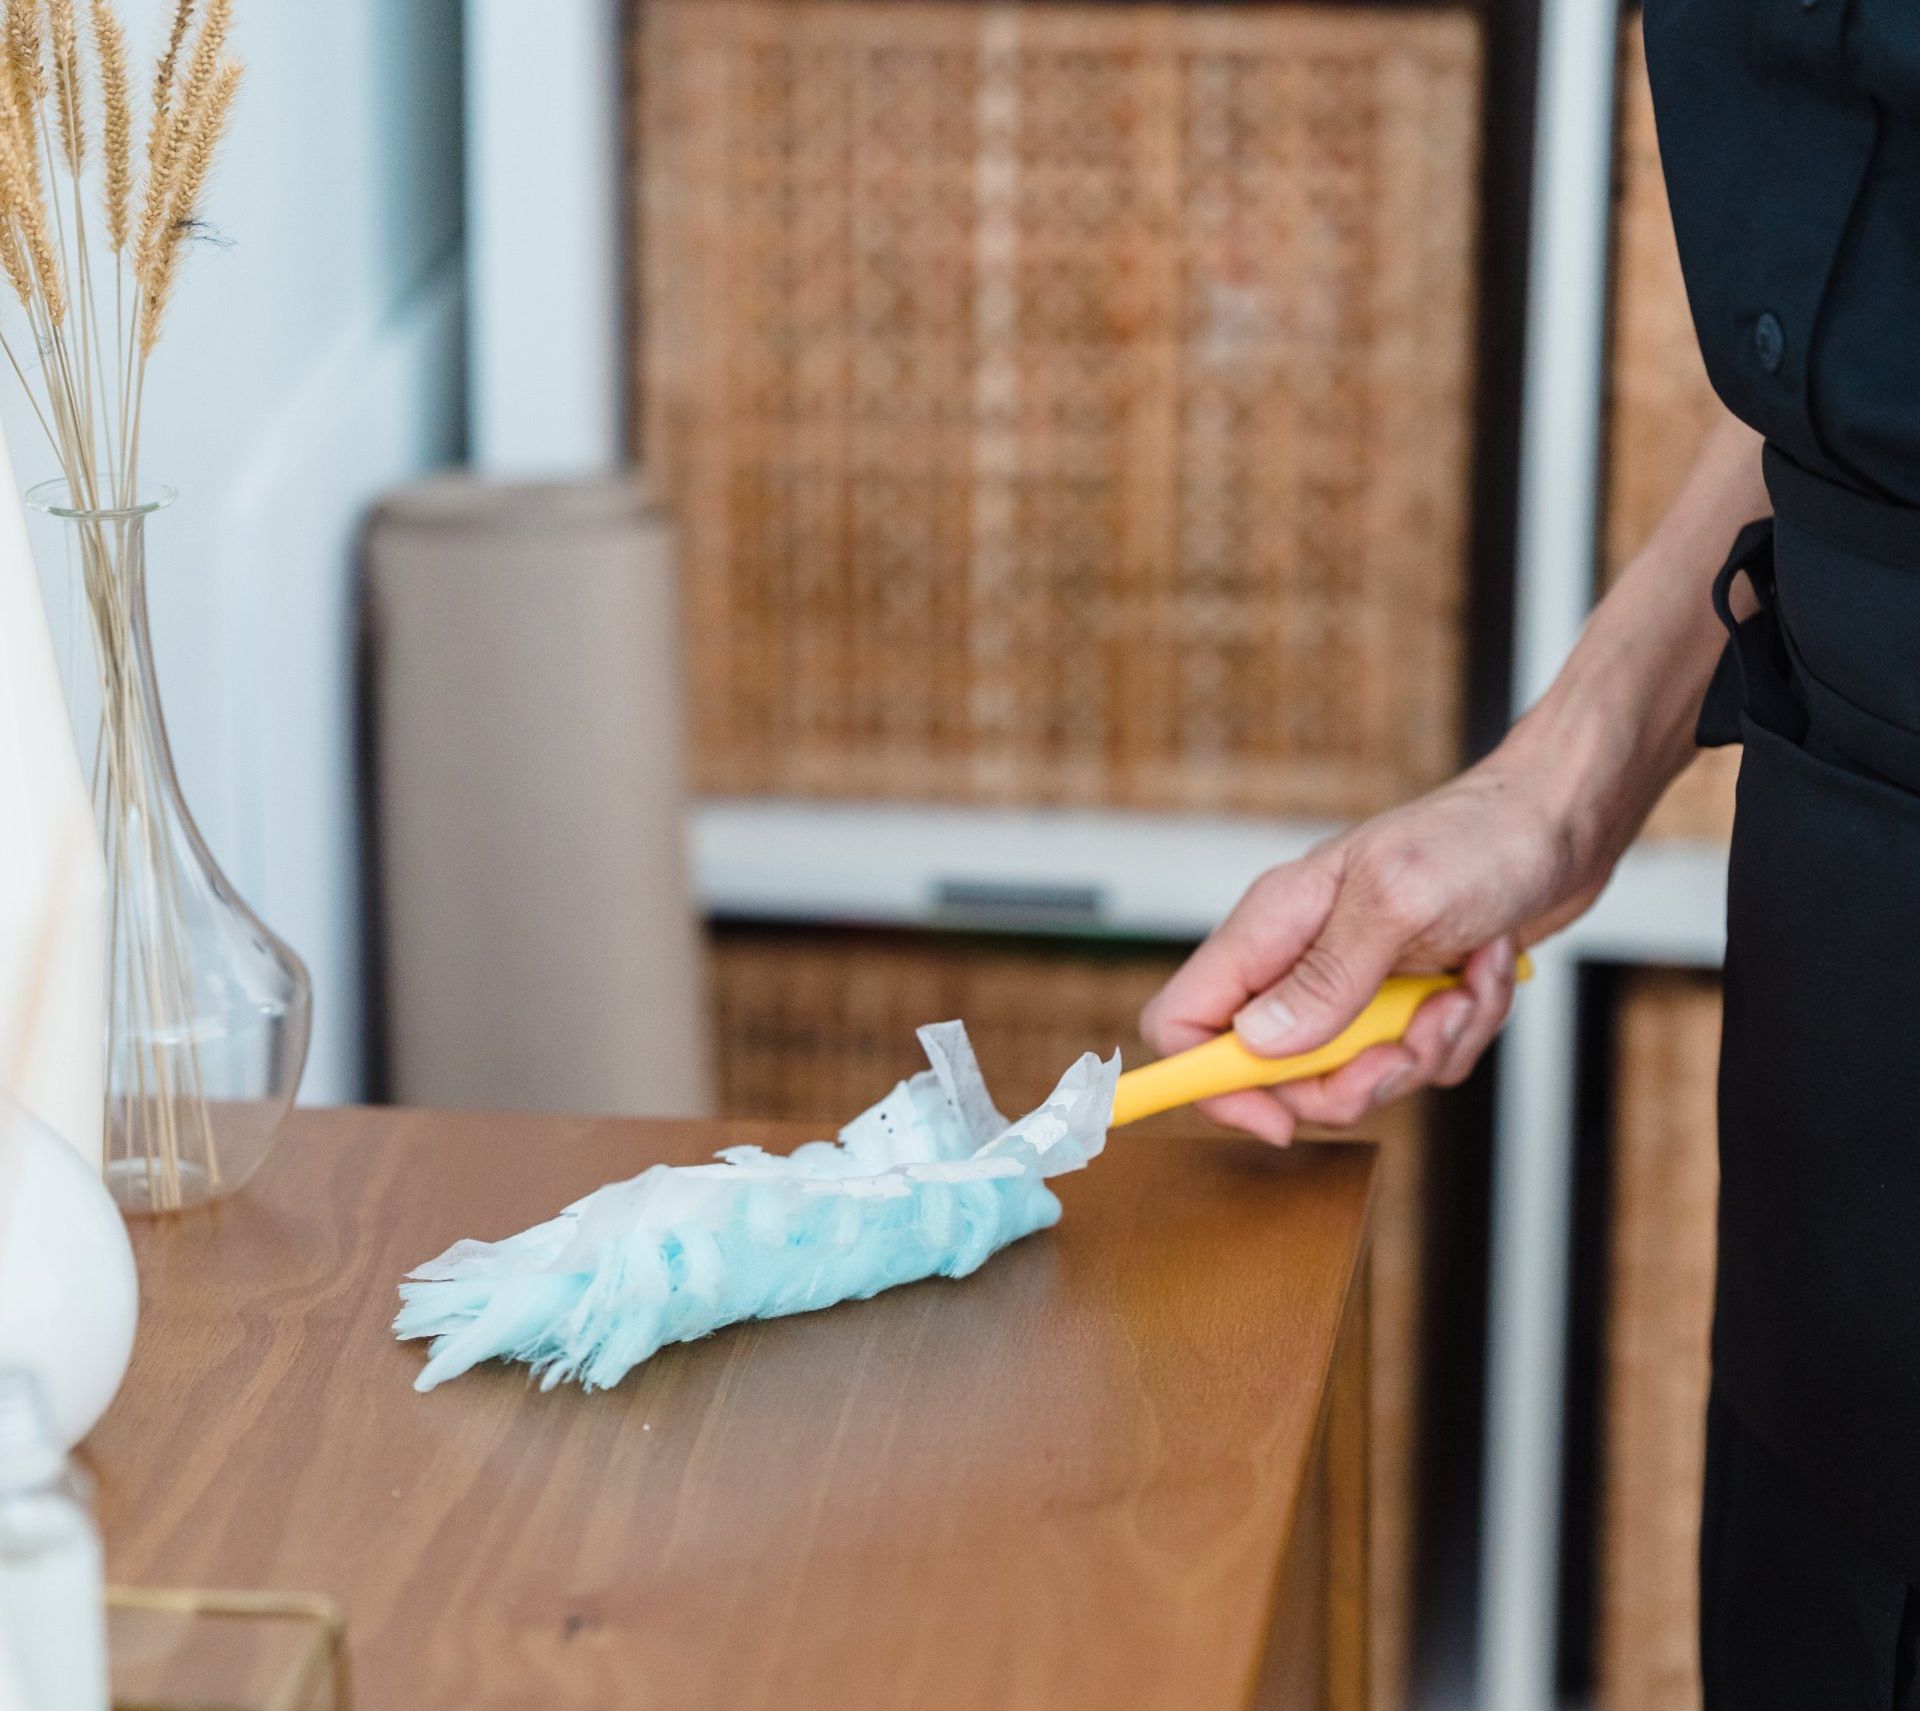 A person is cleaning a wooden table with a duster.